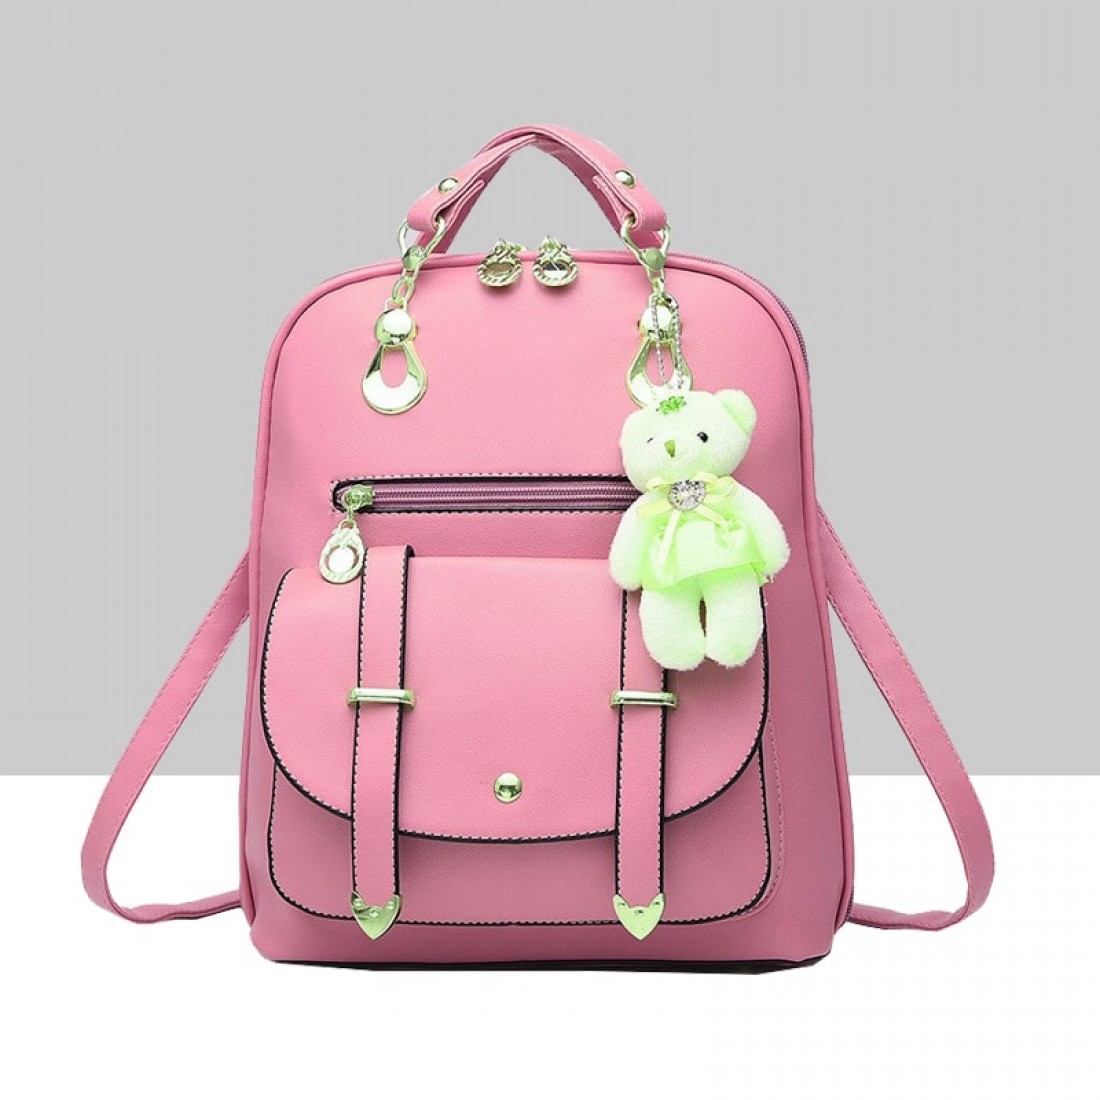 Buy Teddy Bear Hanging Pink Double Strap Backpack WB-85PK ...